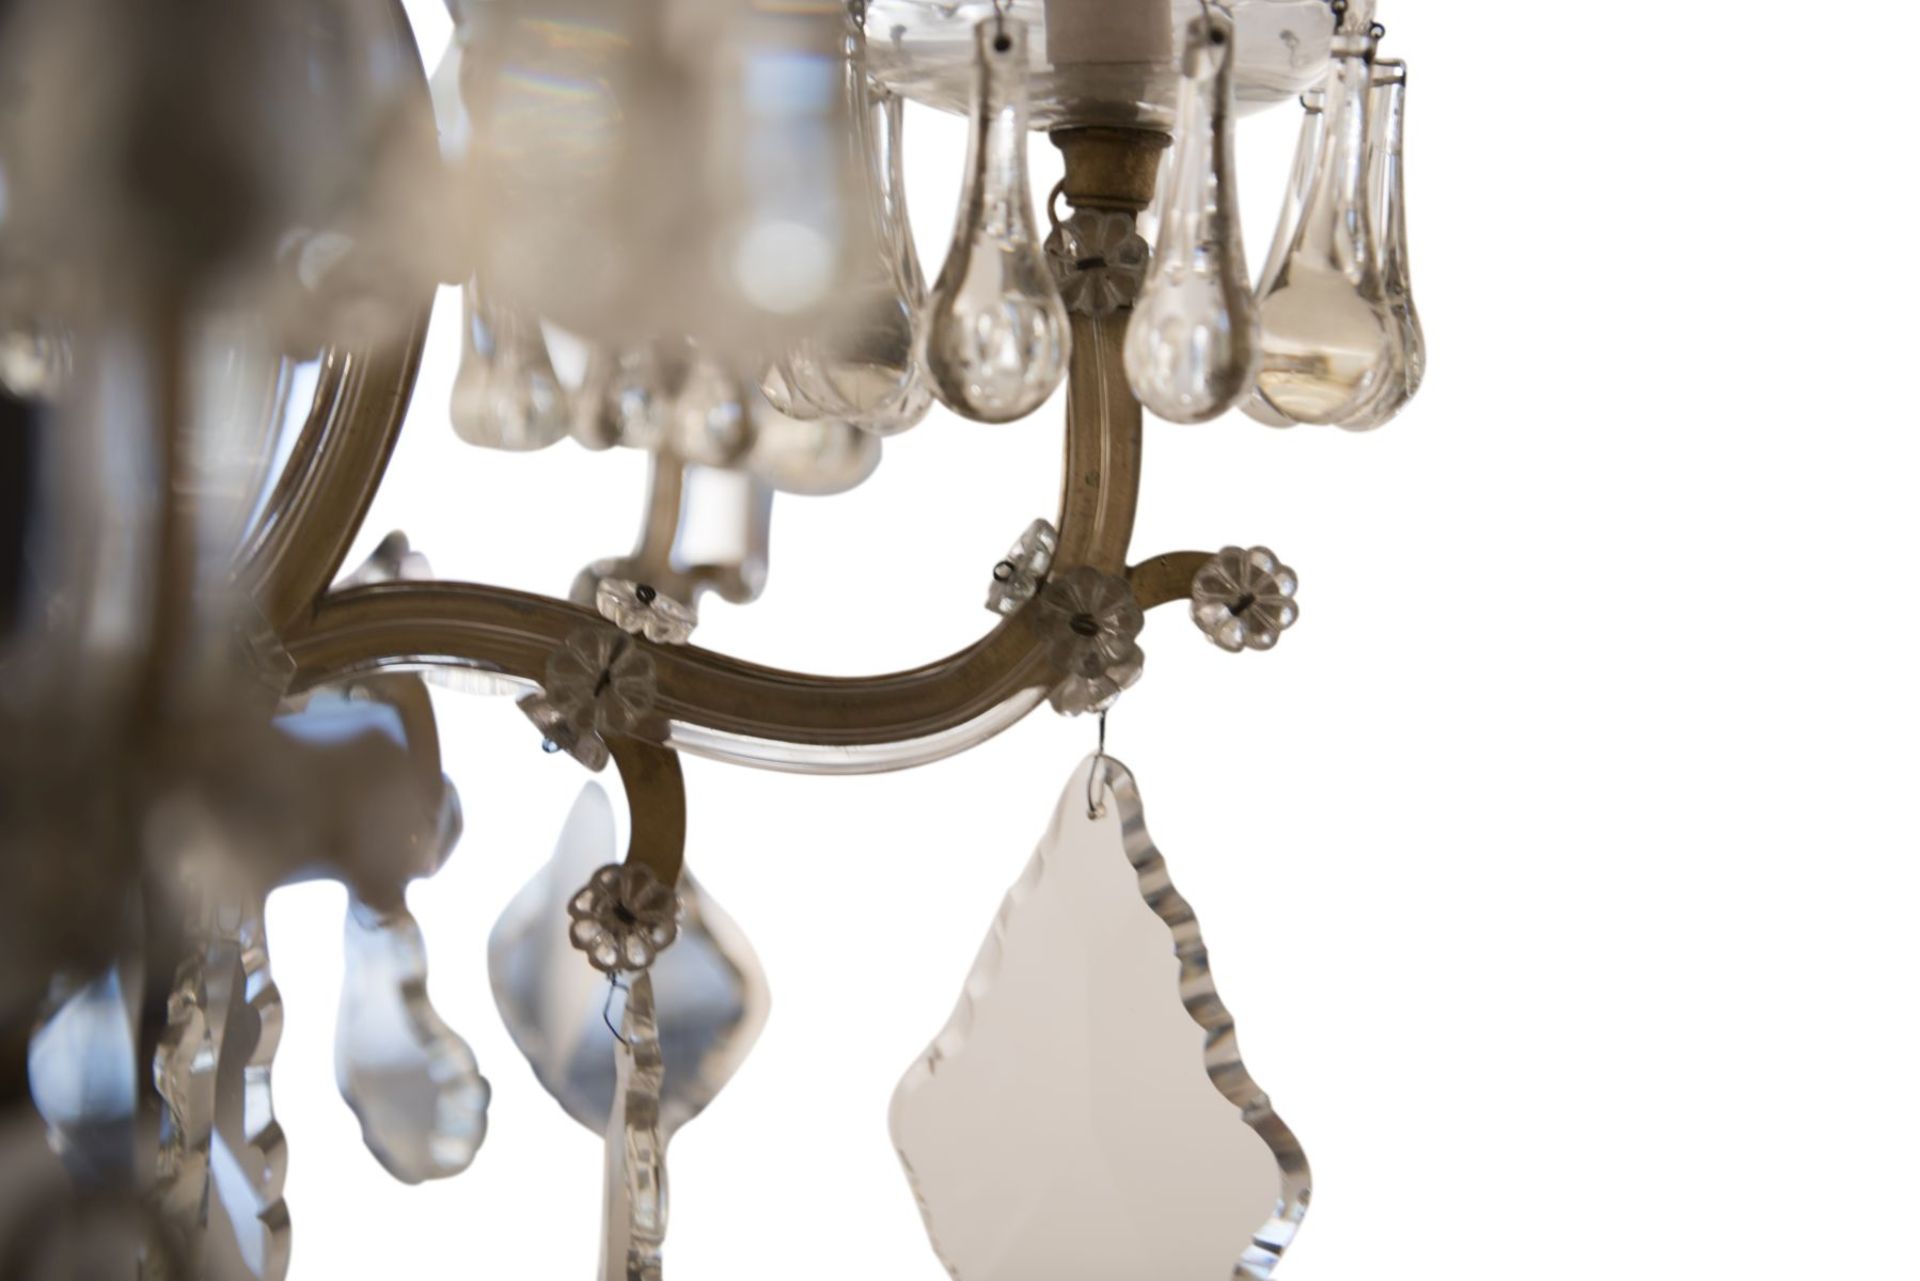 Decorative Salon Chandelier, Maria Theresia Style | Dekorativer Salon Luster, Maria Theresia Stil - Image 6 of 8